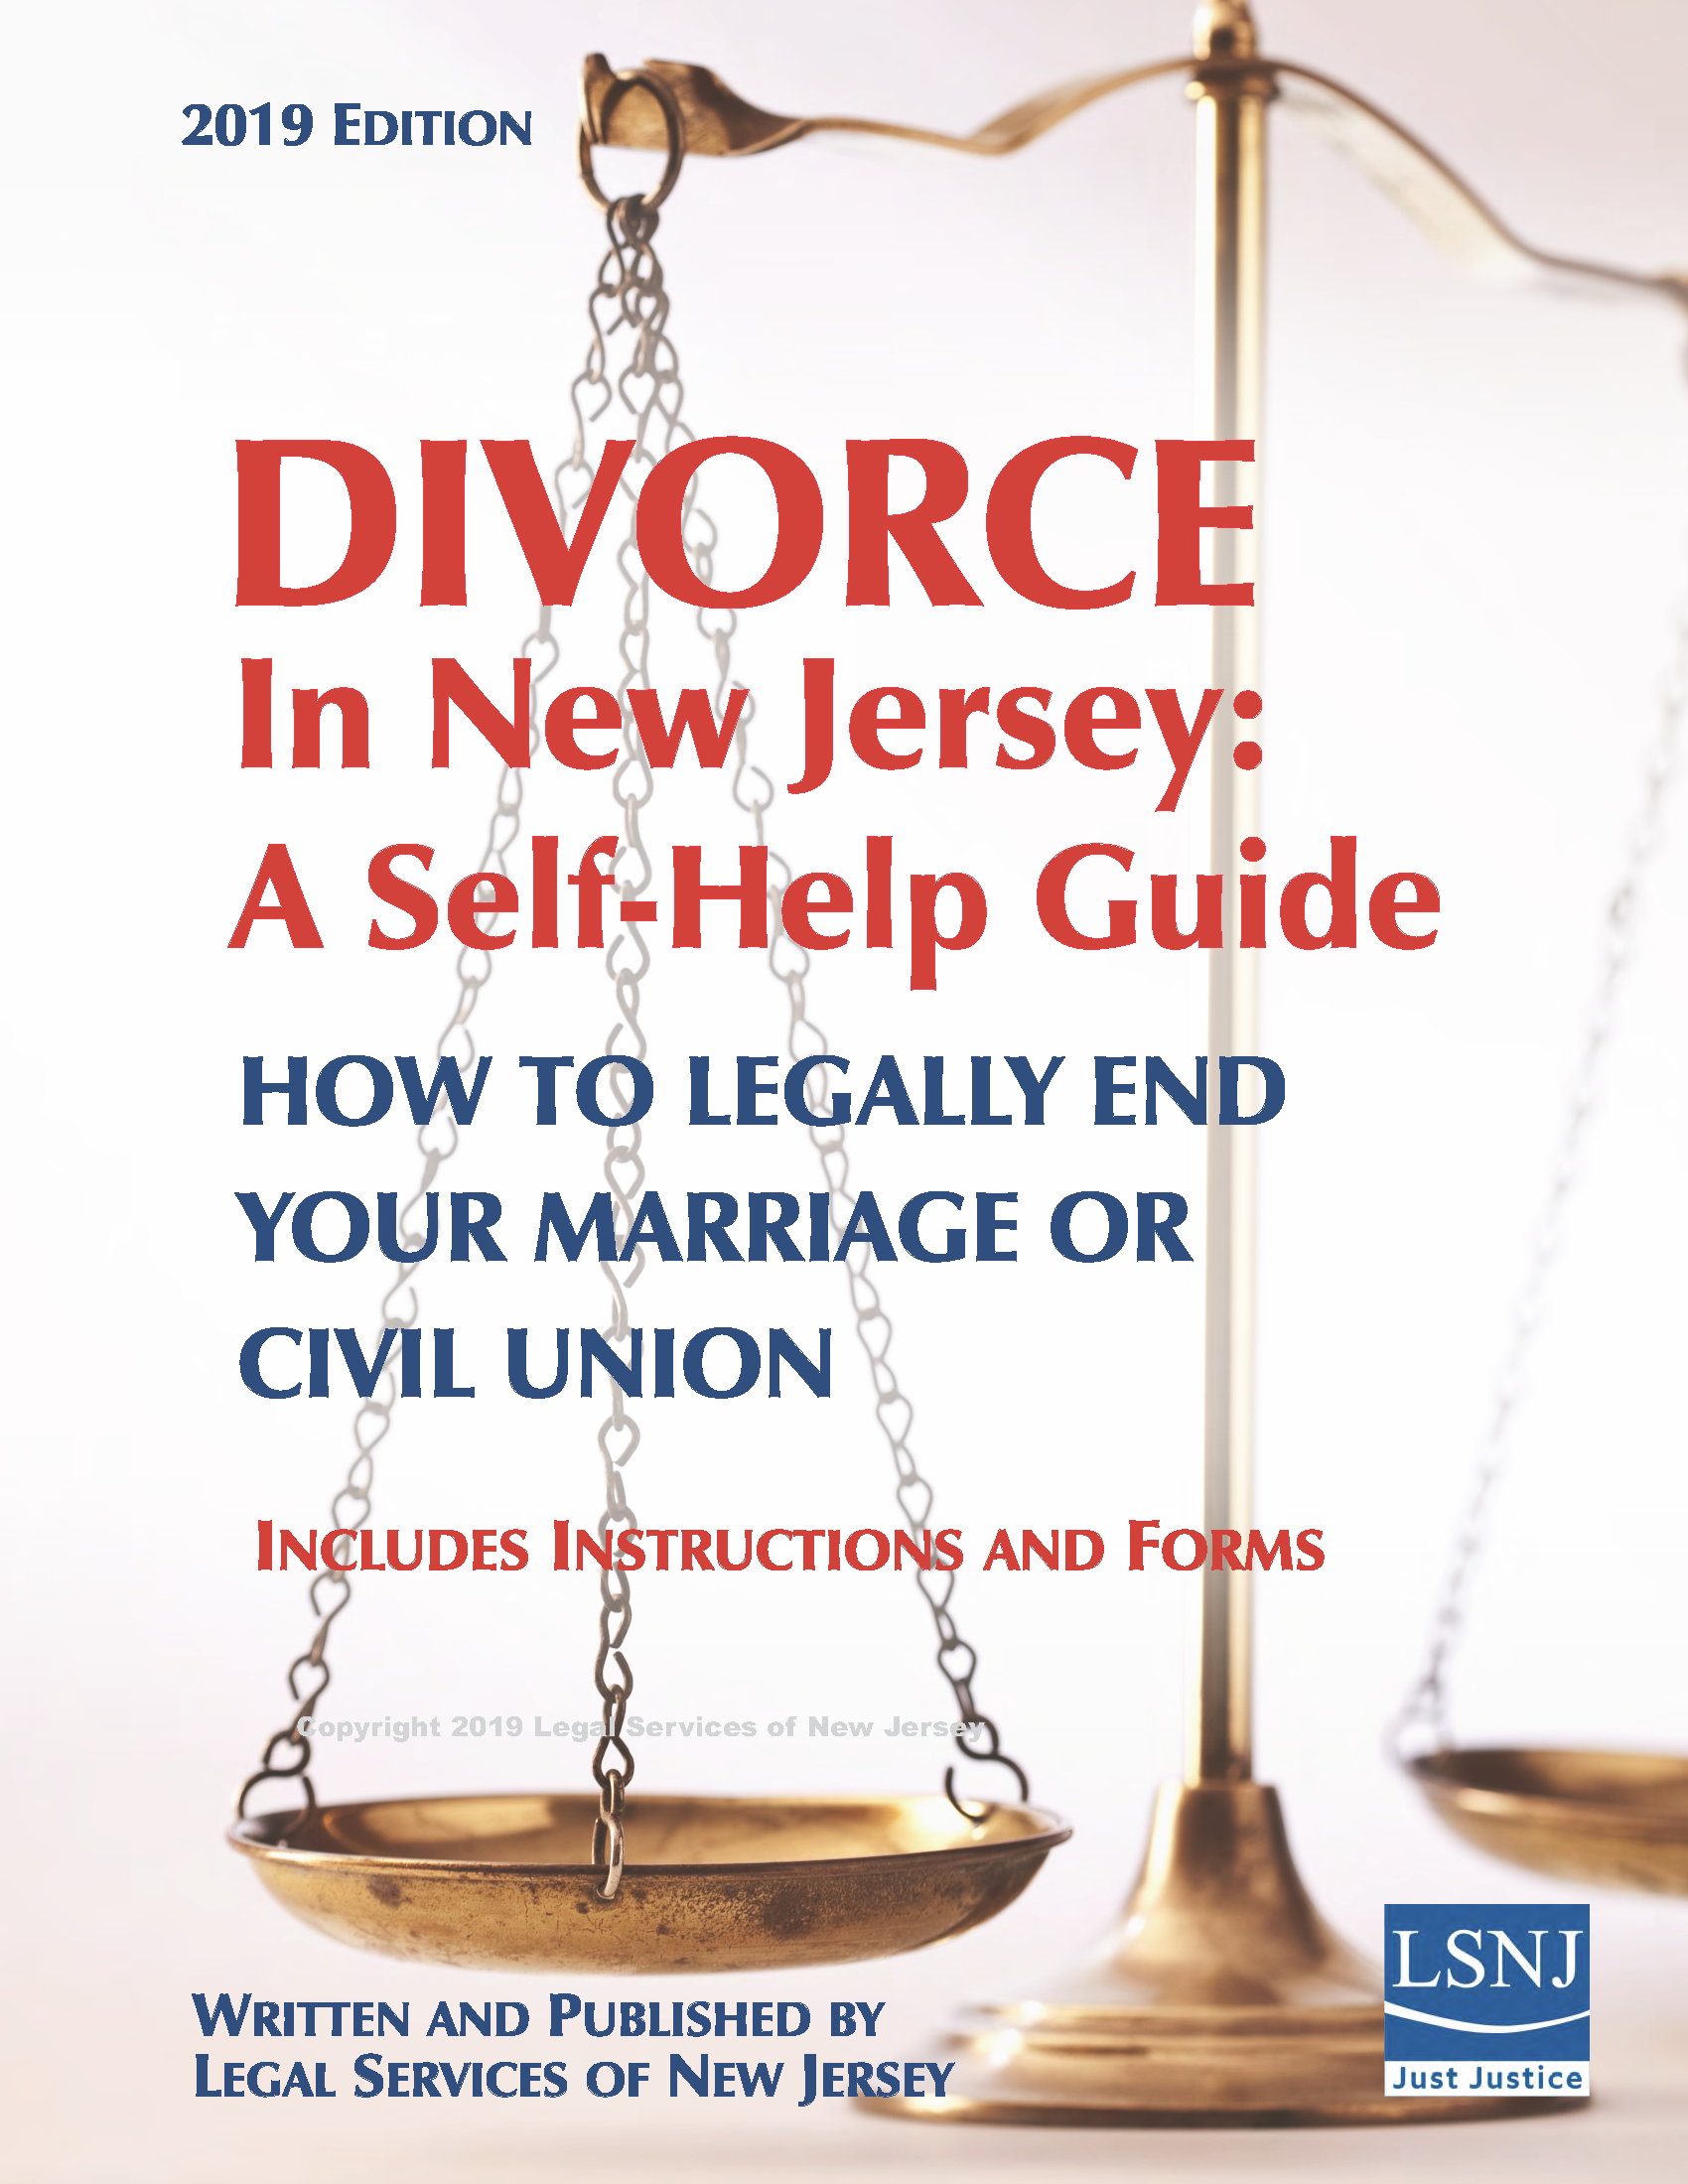 Divorce in New Jersey: A Self-Help Guide